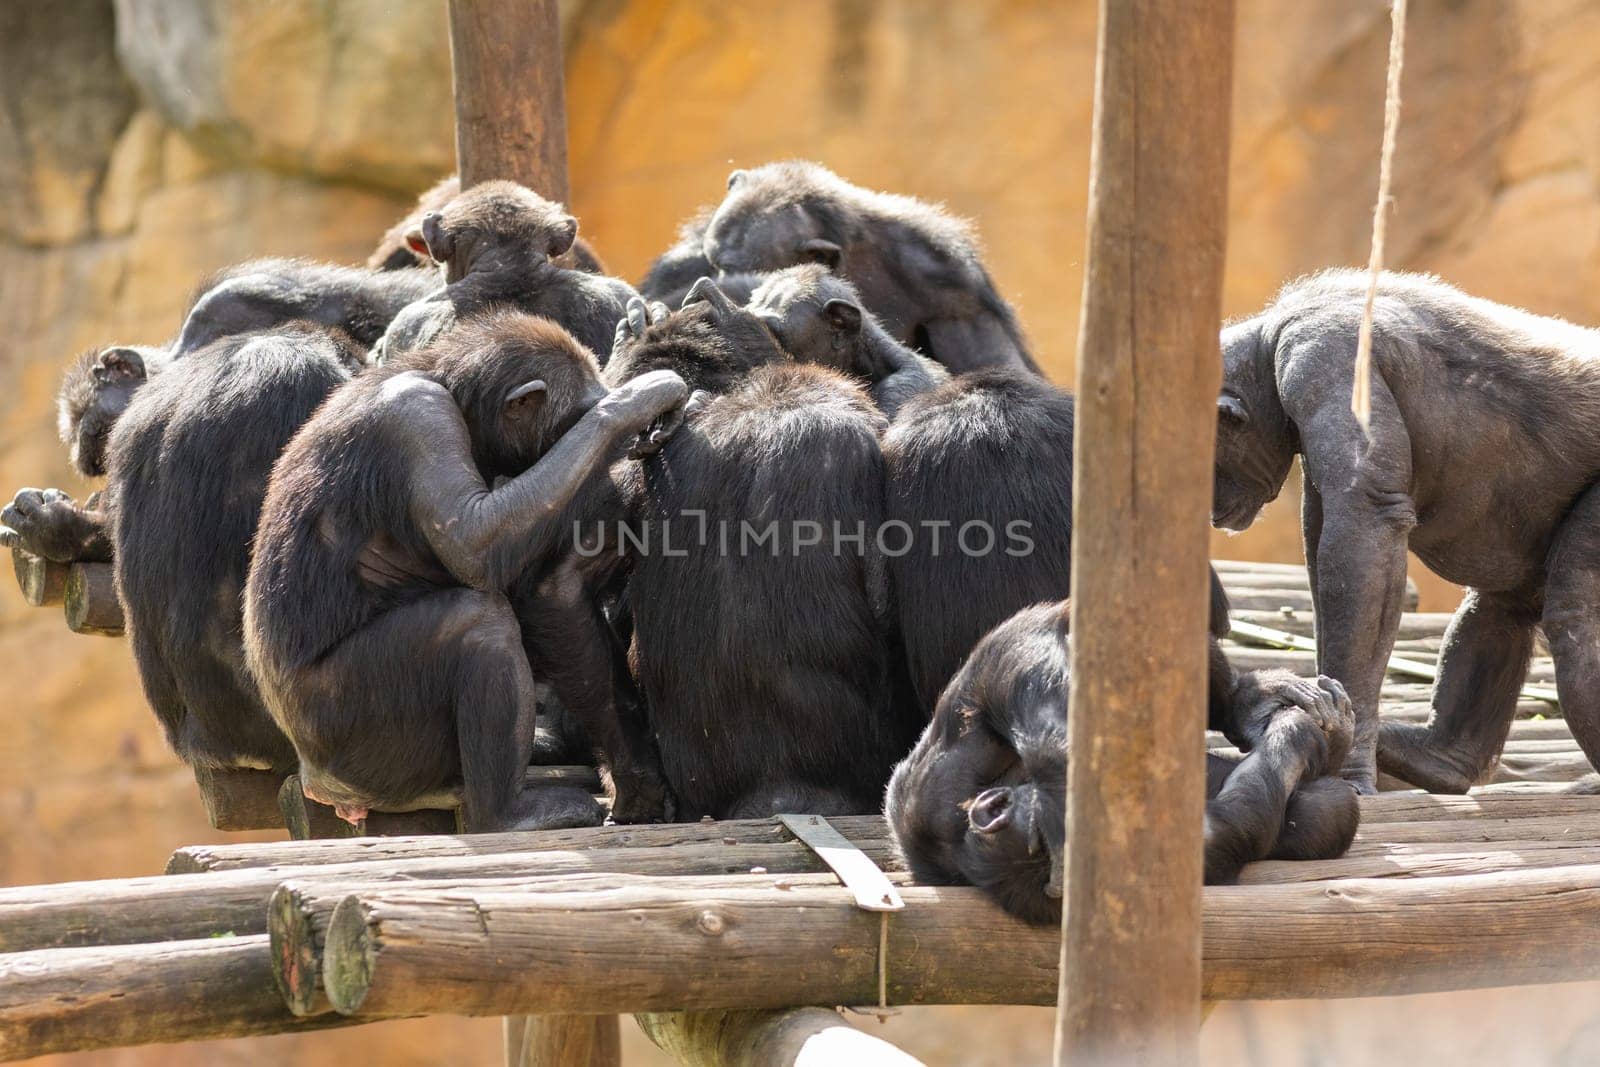 A group of monkeys sitting on top of a wooden platform